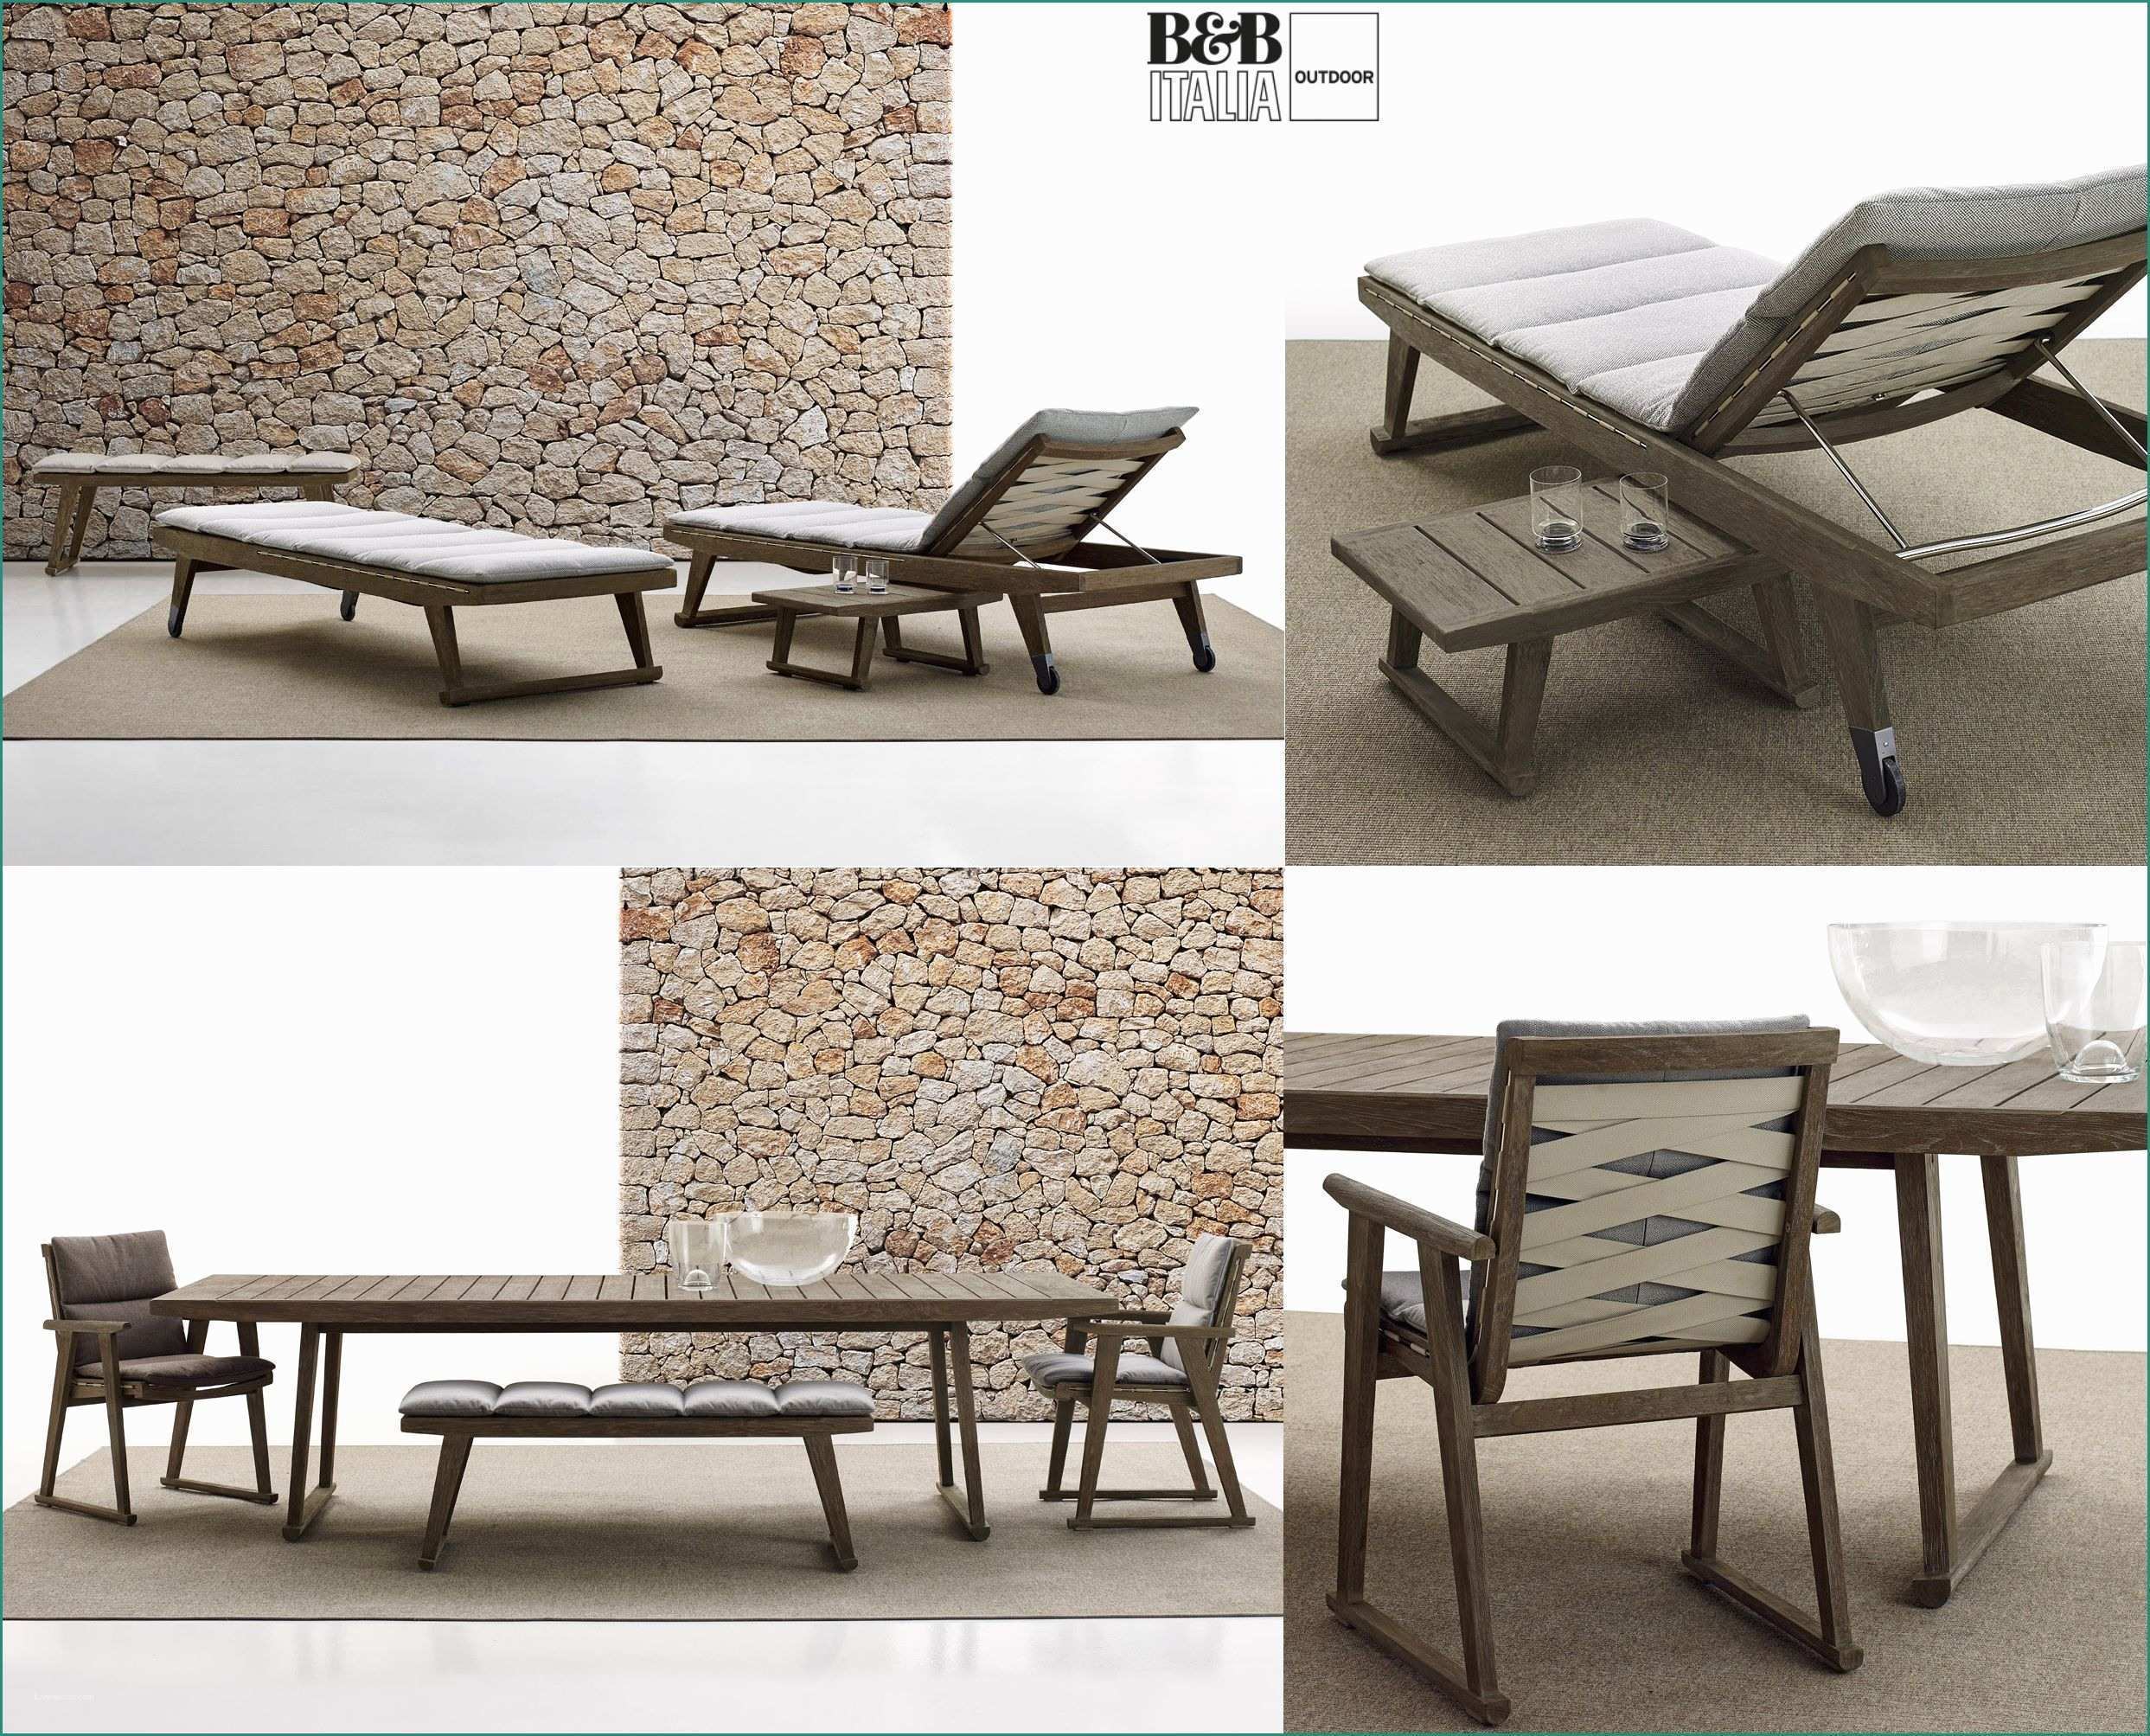 Lettino Da Giardino E Gio Collection Chaise Longue Sunbeds Armchairs Chairs Tables and